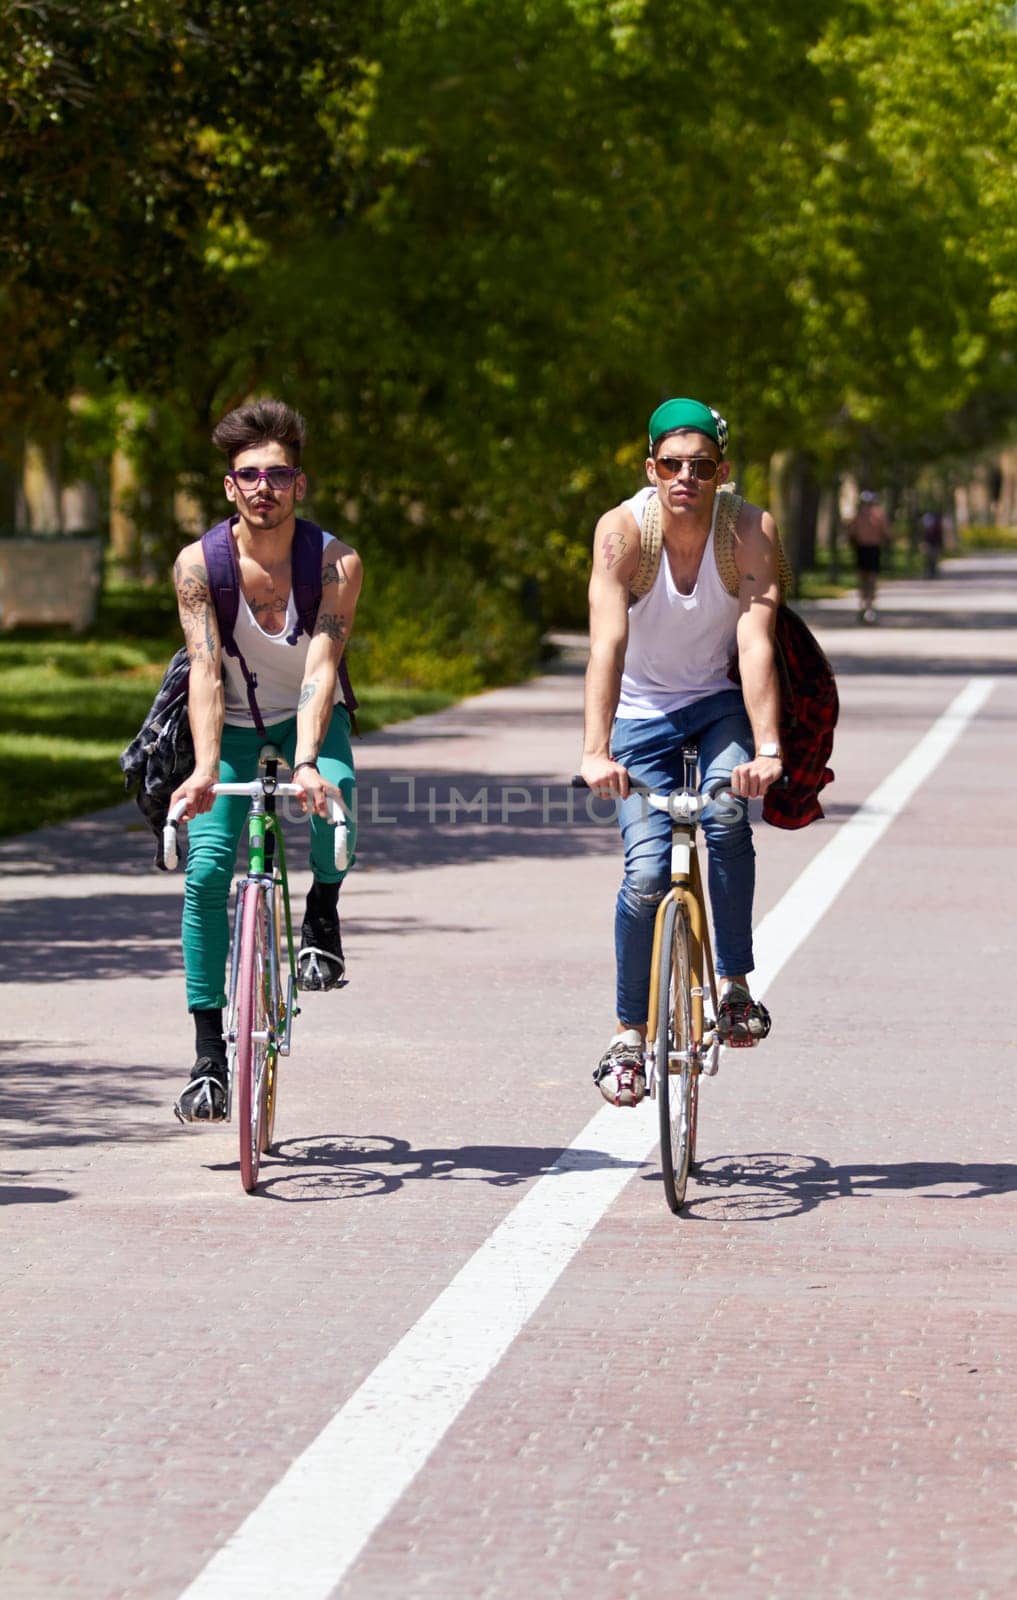 Bicycle, travel and men friends in a city street riding, bond and enjoying freedom on holiday or vacation together. Cycling, bike and people in a road with freedom, adventure and neighborhood hangout.